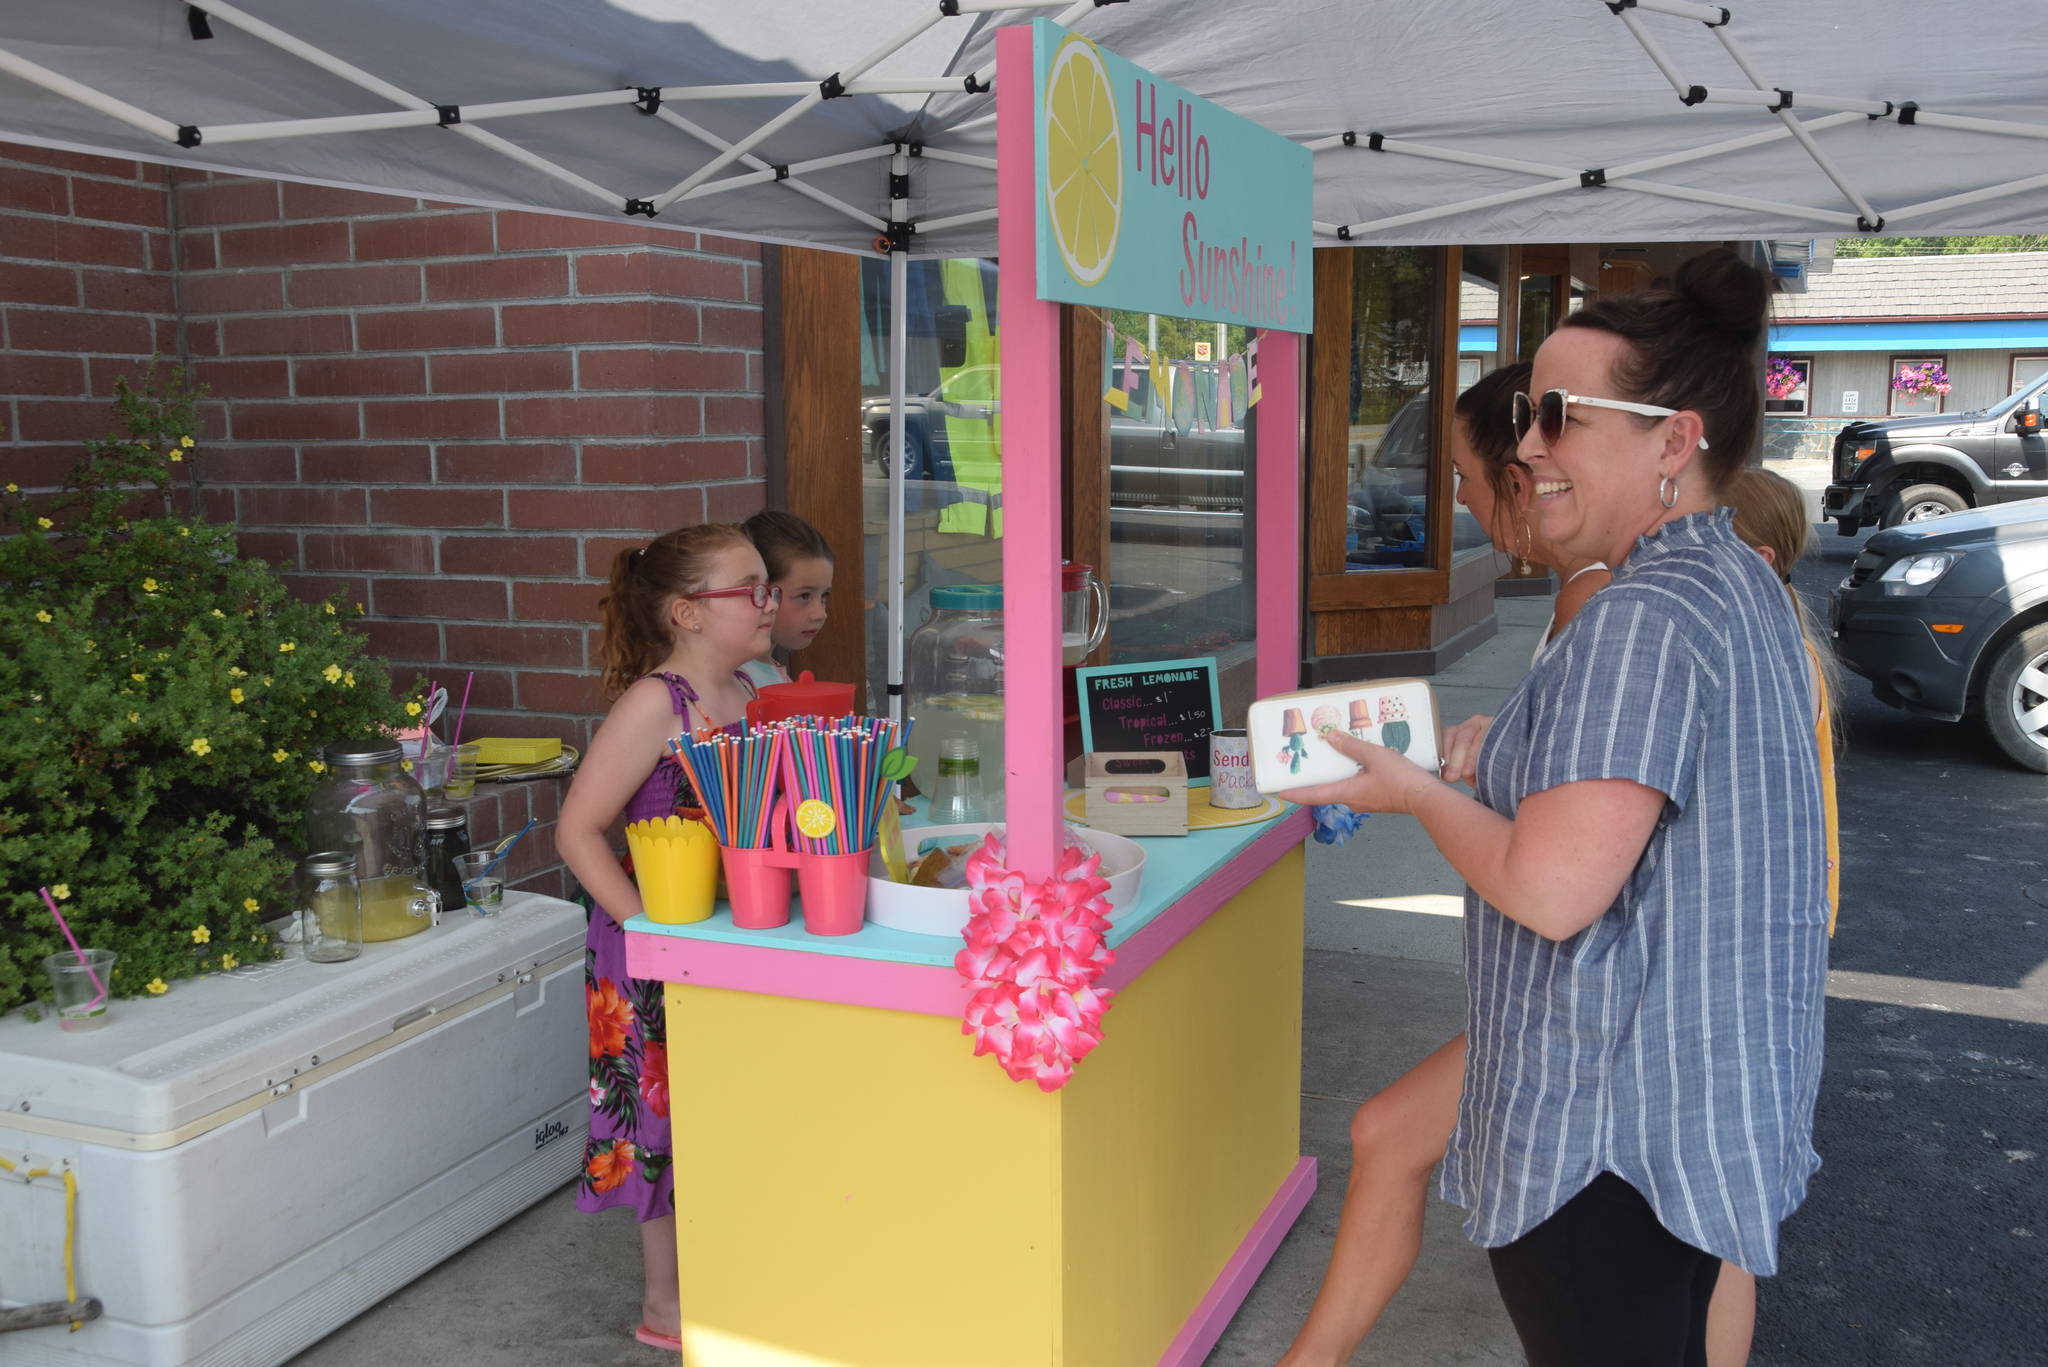 Kinley Clack, left, and Brooklynne Timm serve some customers at their lemonade stand outside of Sweeney’s during Lemonade Day in Soldotna, Alaska on June 29, 2019. (Photo by Brian Mazurek/Peninsula Clarion)